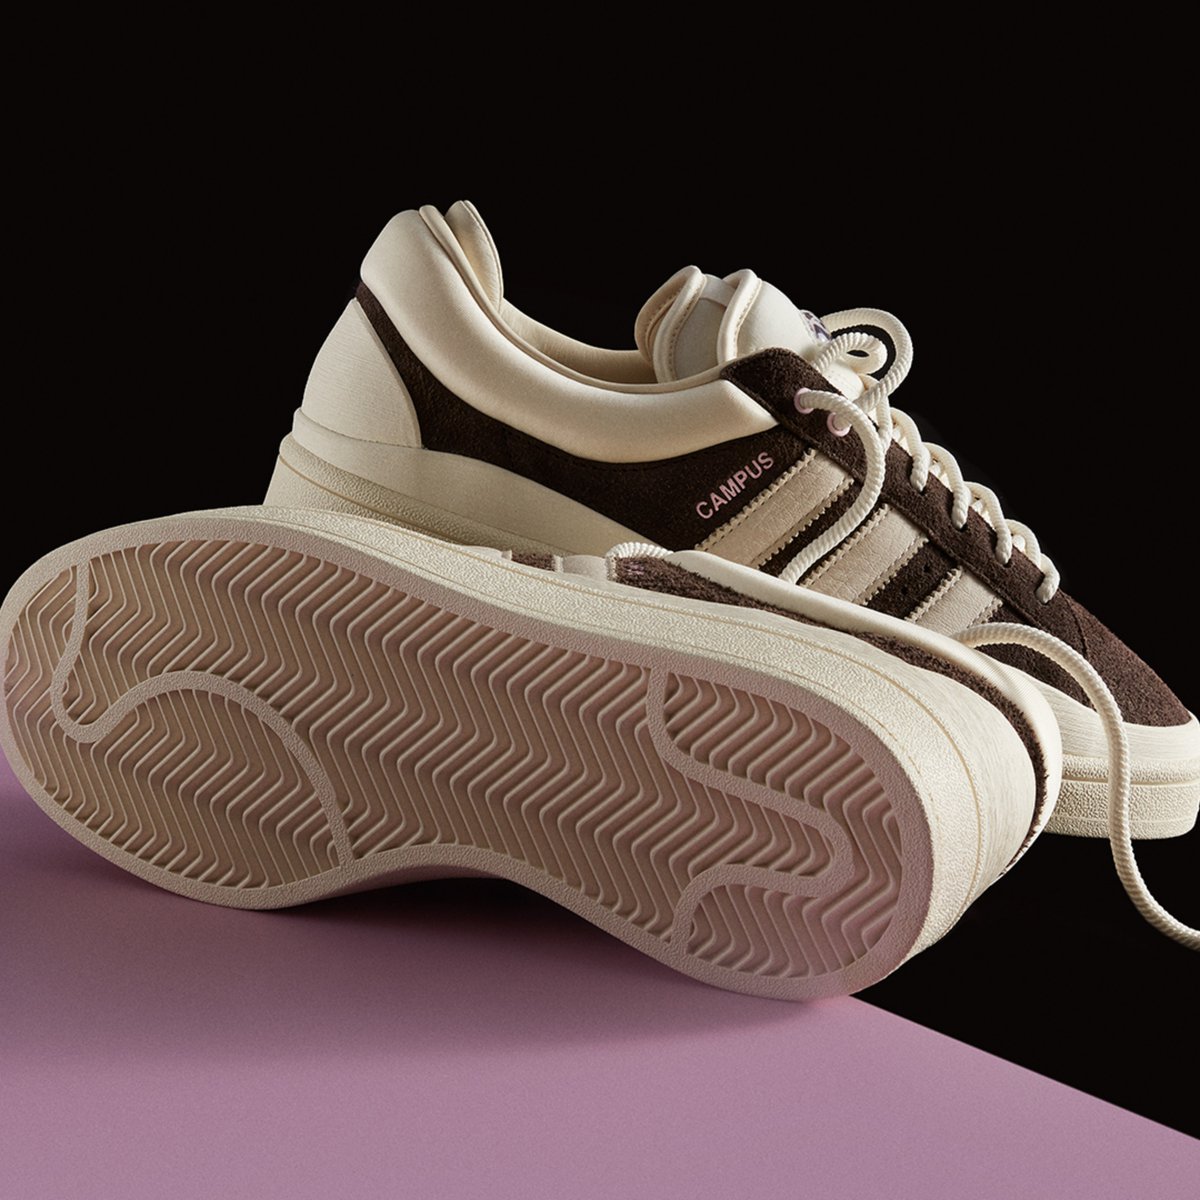 Bad Bunny x Adidas Campus 'The Last Campus' // Available Saturday, 5/11 at 11am at UNDEFEATED Phoenix, New York and 8am EST at Undefeated.com @adidas